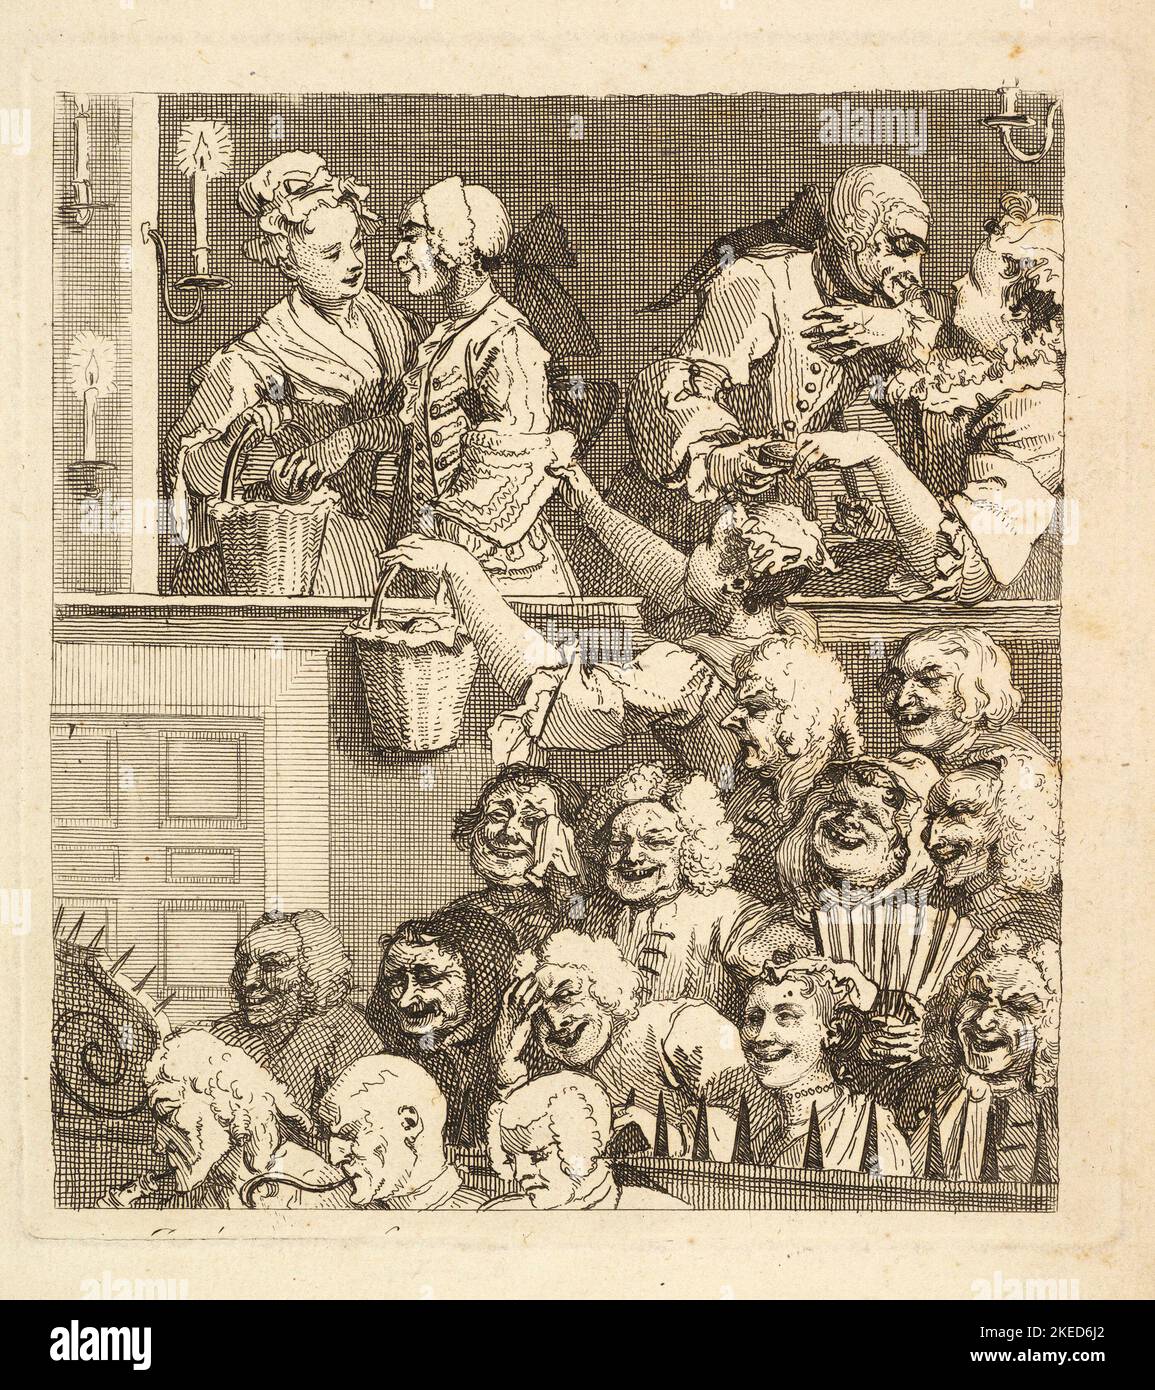 The Laughing Audience. William Hogarth. December 1733. Stock Photo